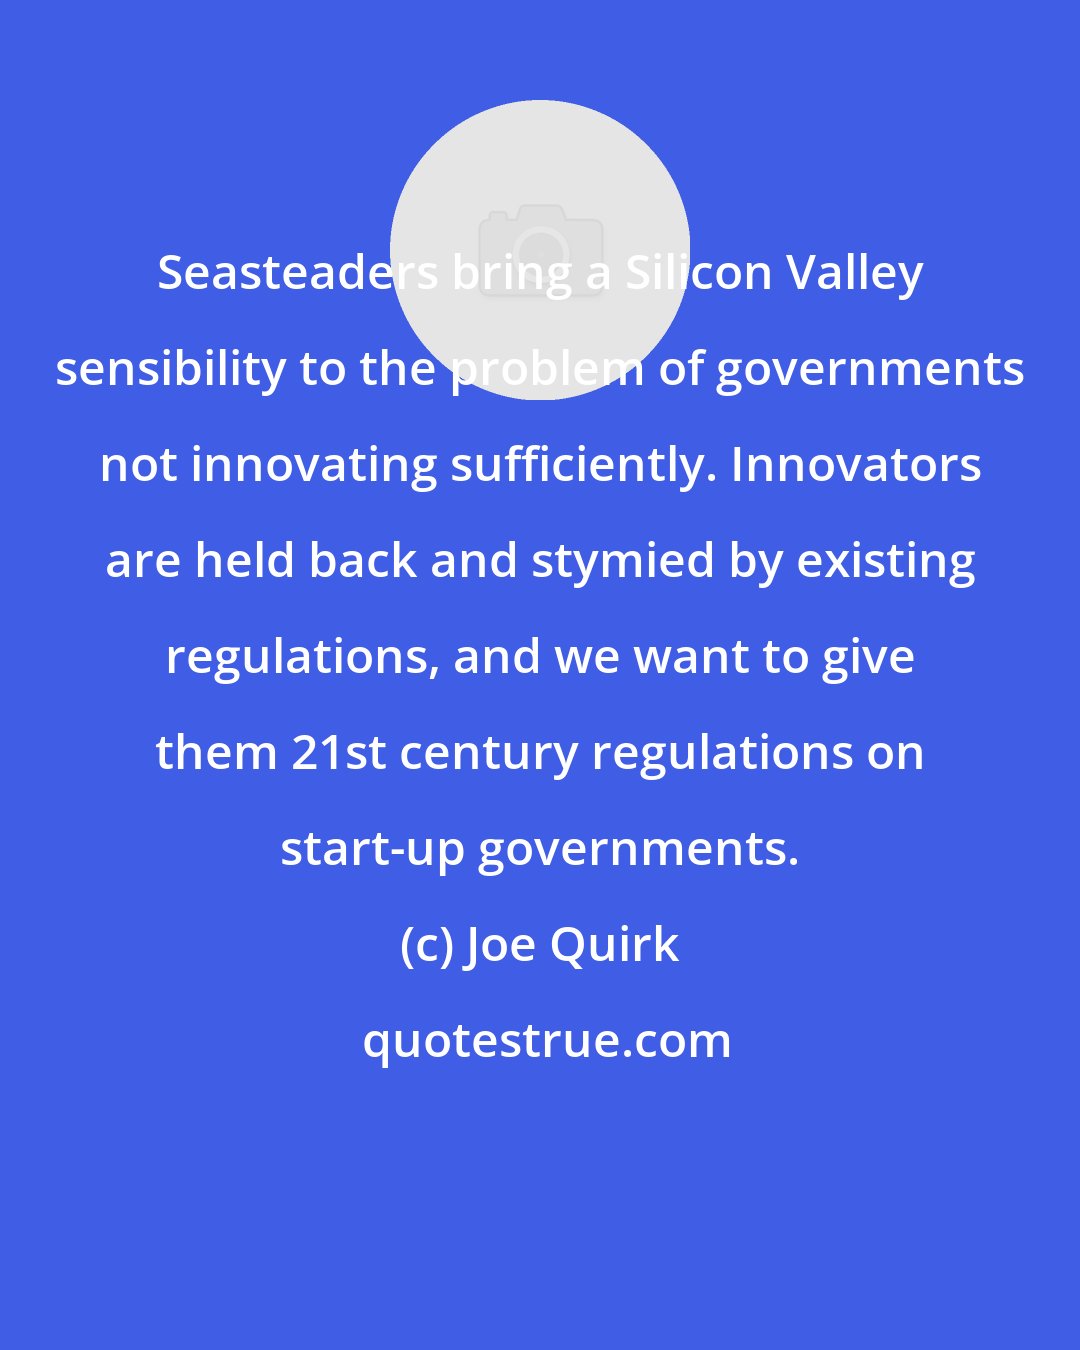 Joe Quirk: Seasteaders bring a Silicon Valley sensibility to the problem of governments not innovating sufficiently. Innovators are held back and stymied by existing regulations, and we want to give them 21st century regulations on start-up governments.